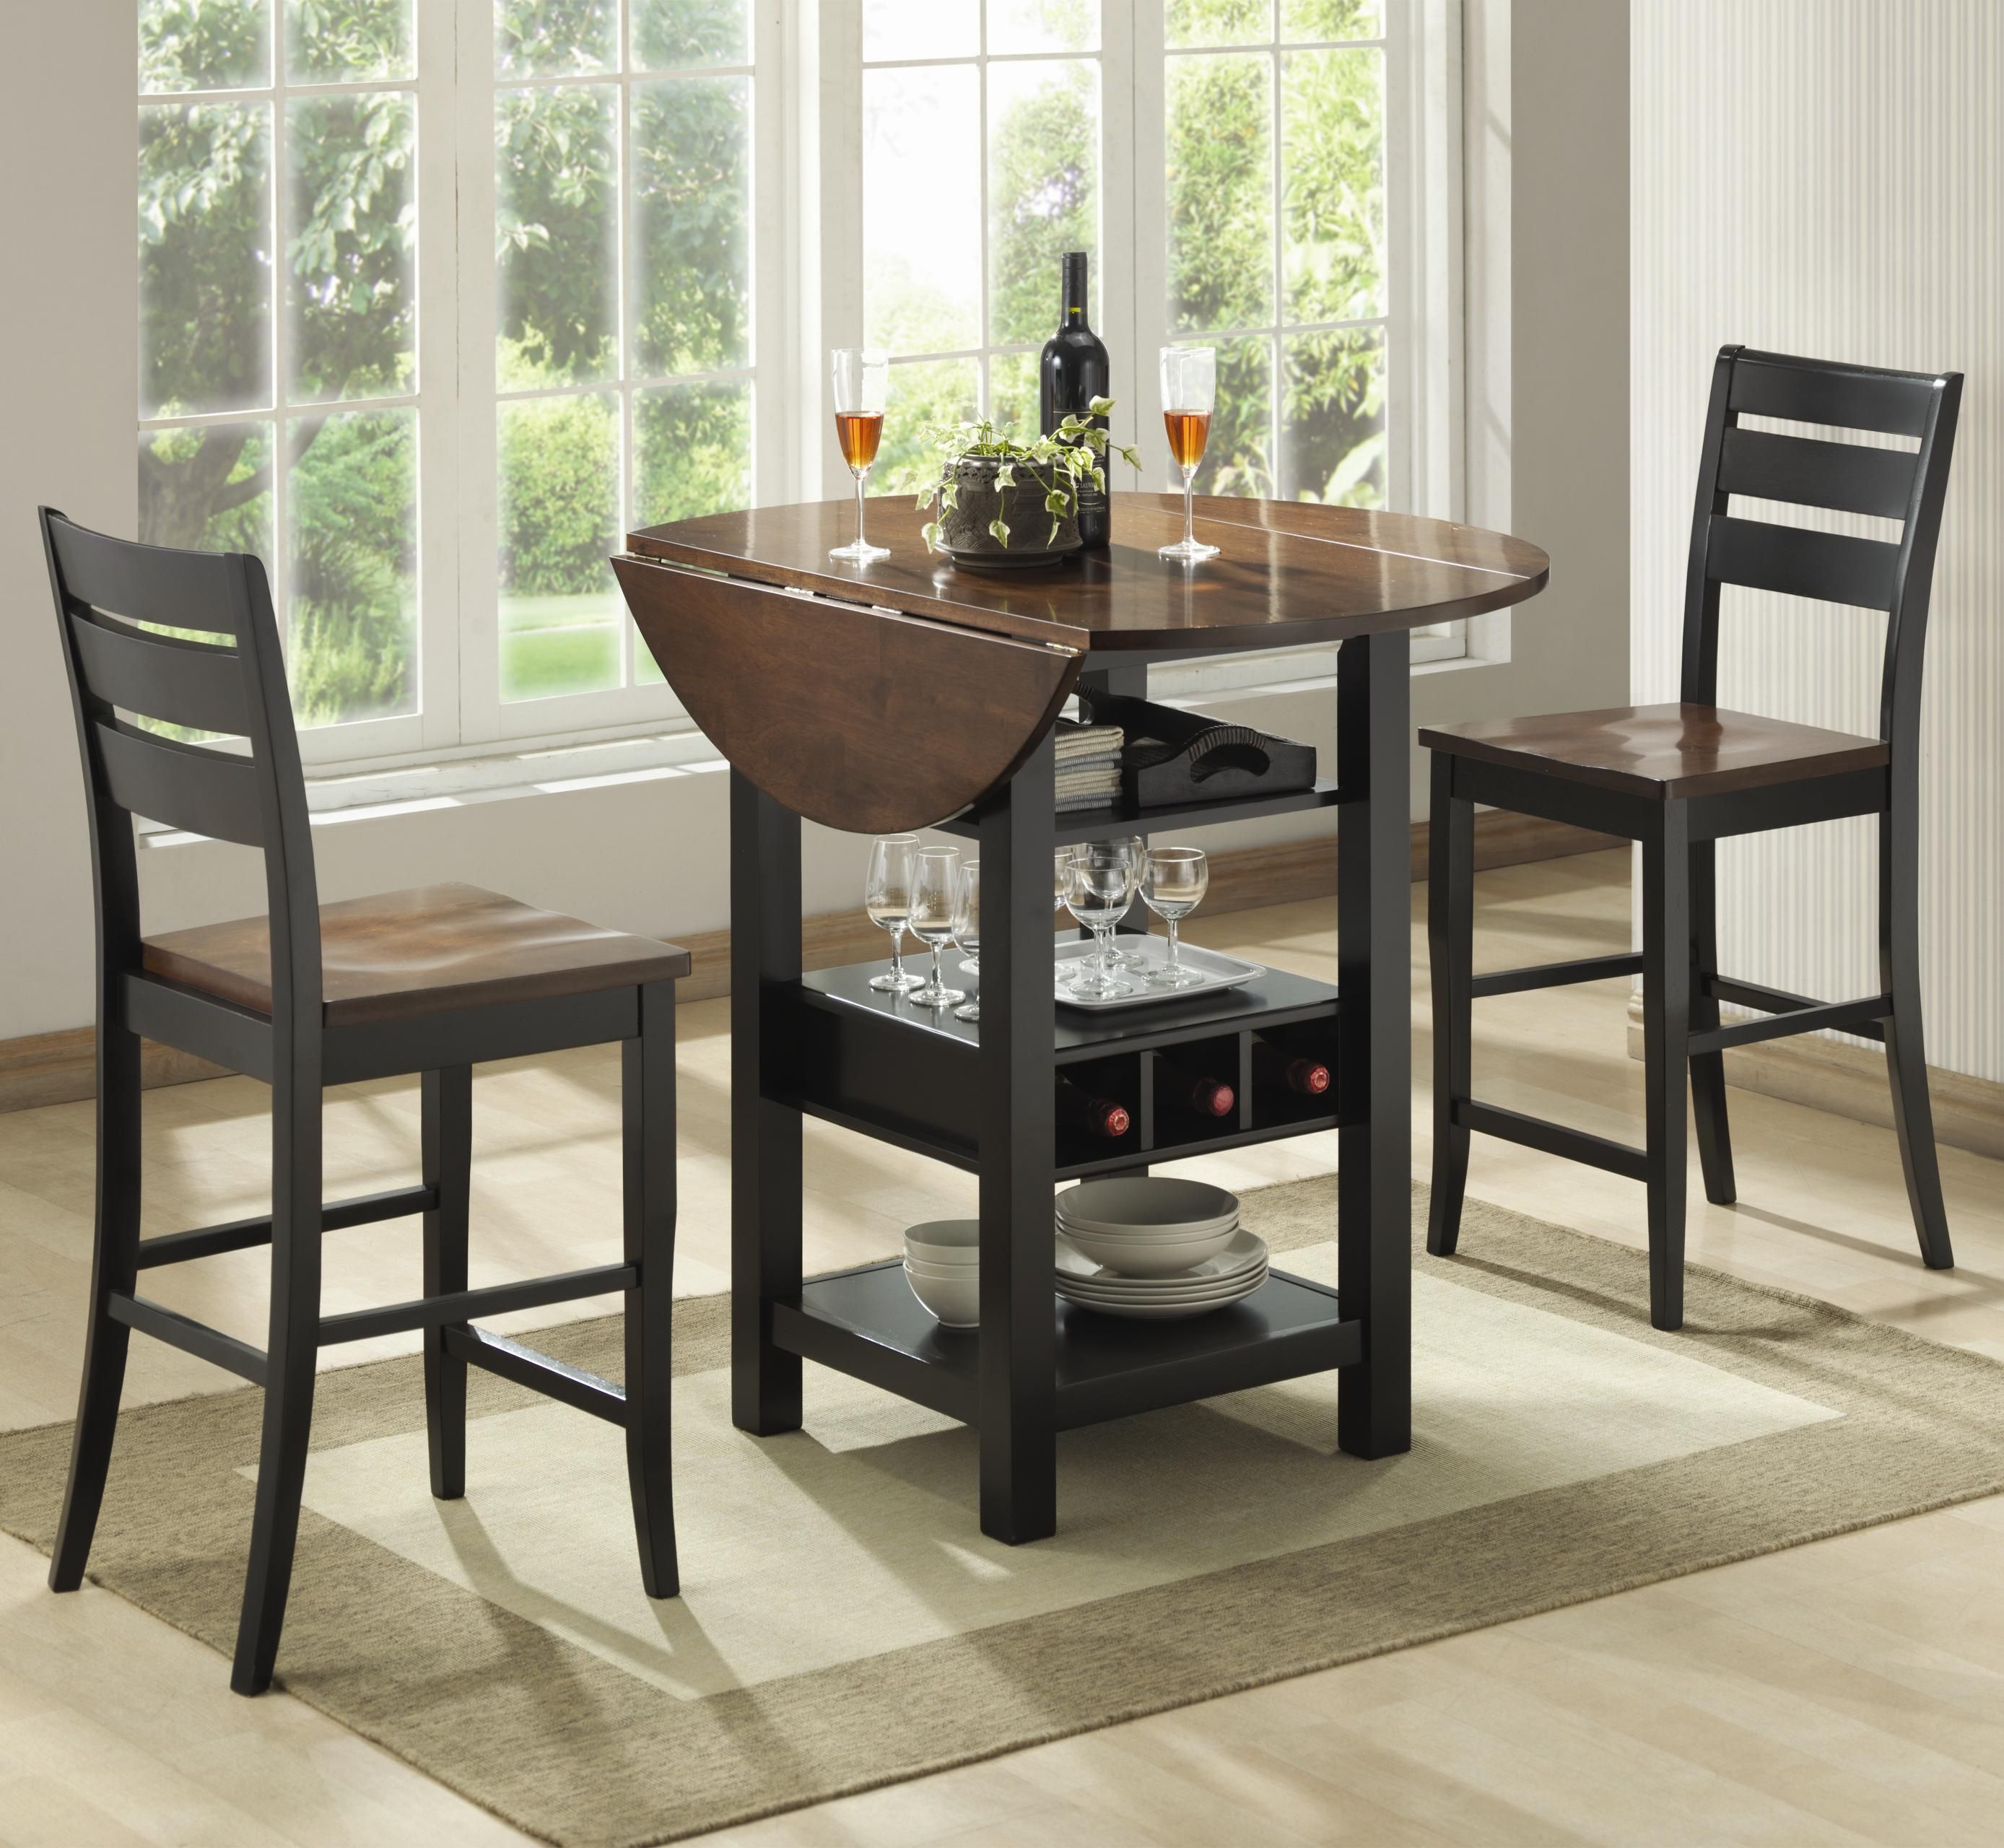 Furniture: Counter Height Pub Table For Enjoy Your Meals And Work In Most Recently Released Cincinnati 3 Piece Dining Sets (View 5 of 20)